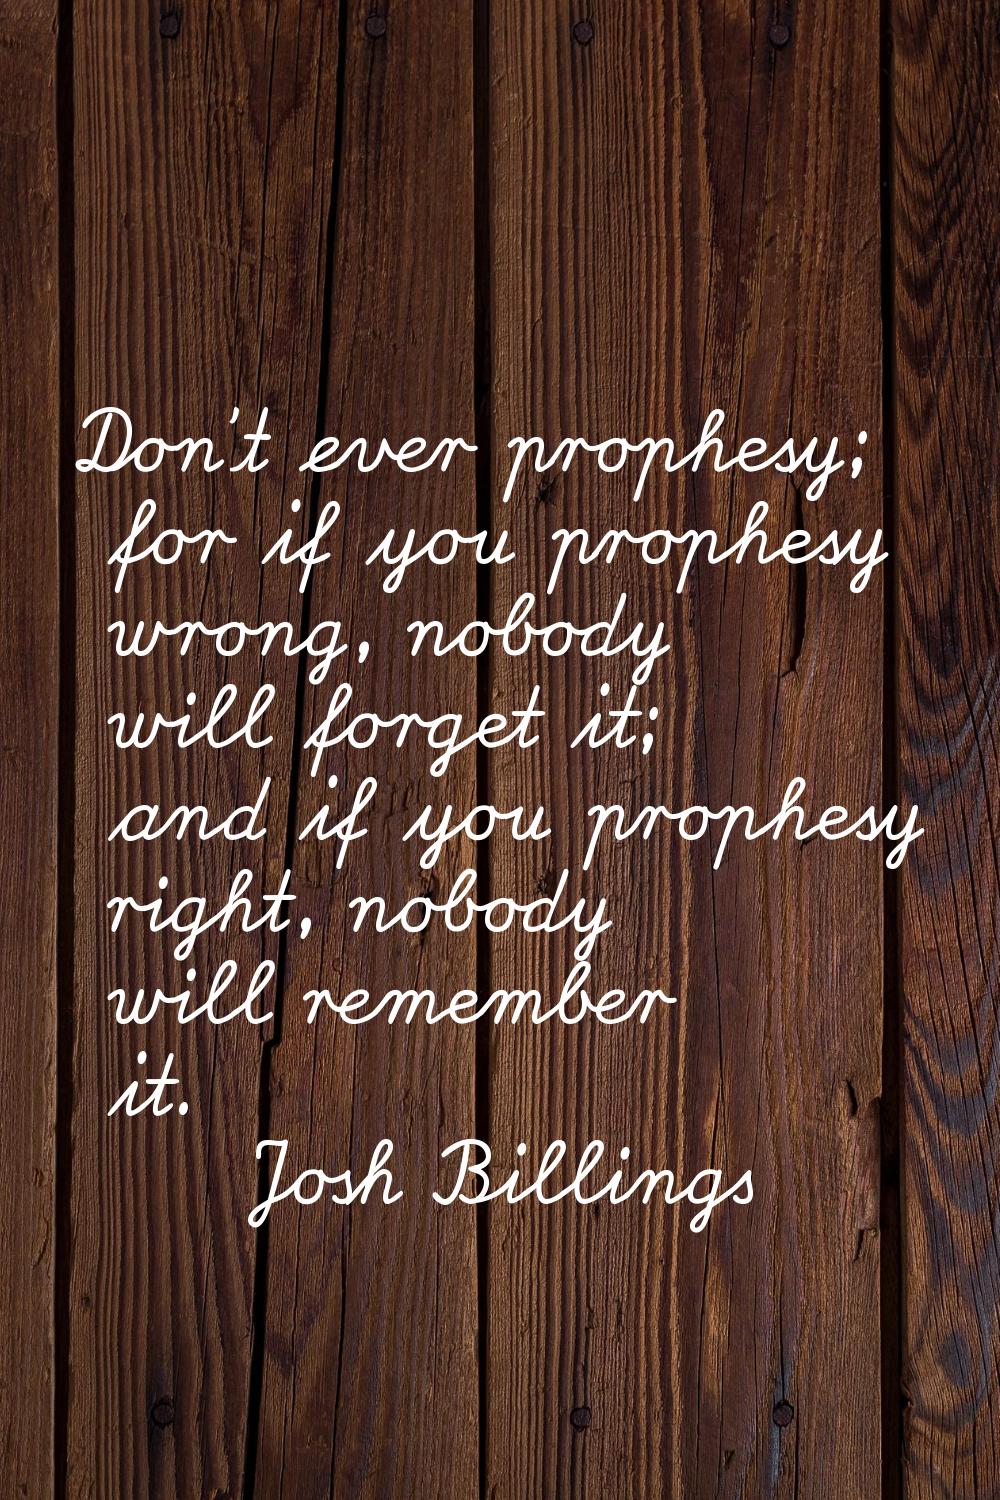 Don't ever prophesy; for if you prophesy wrong, nobody will forget it; and if you prophesy right, n